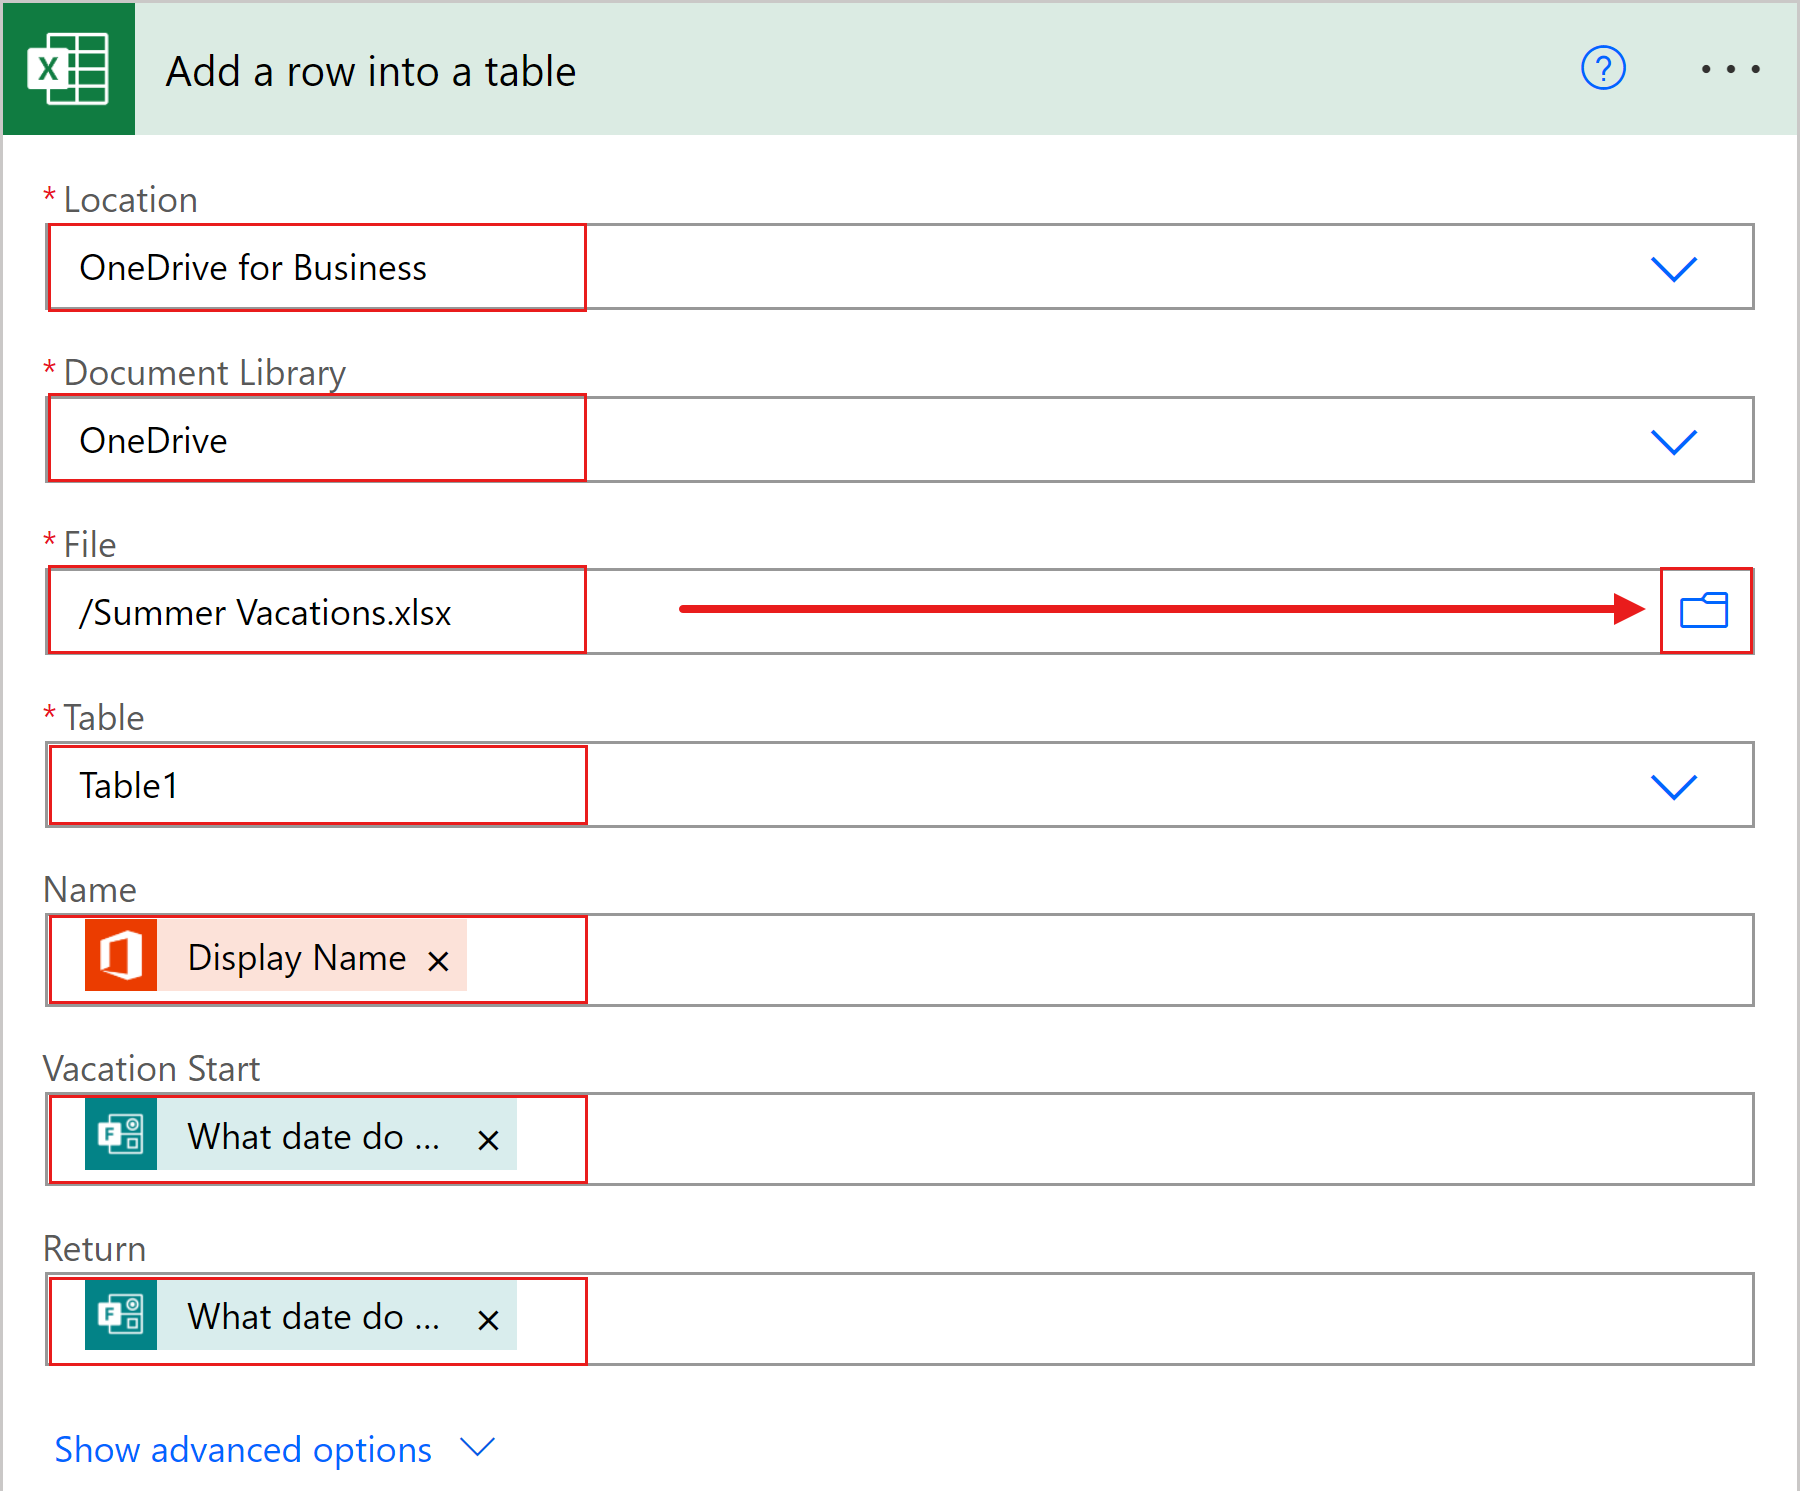 Screenshot of an Excel Add row into a table action in a flow under construction, with dynamic content highlighted.